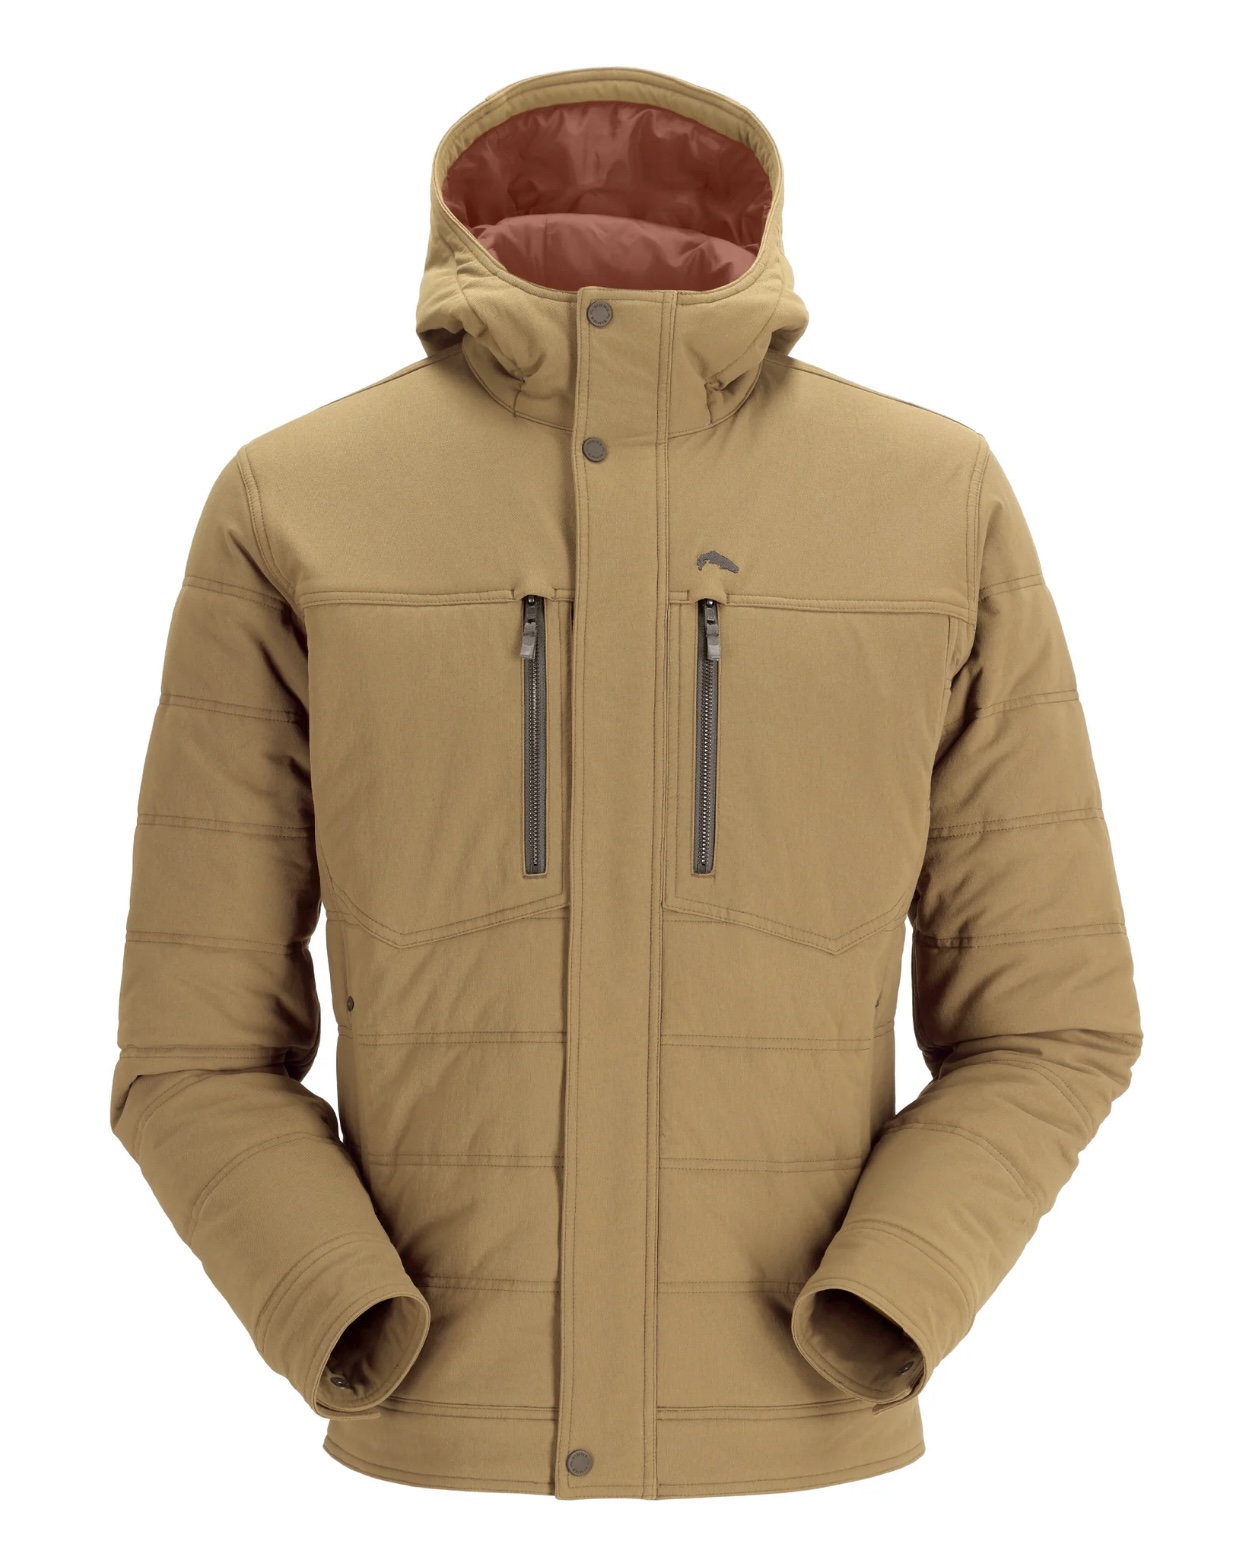 Simms M's Cardwell Hooded Jacket - Camel - Large